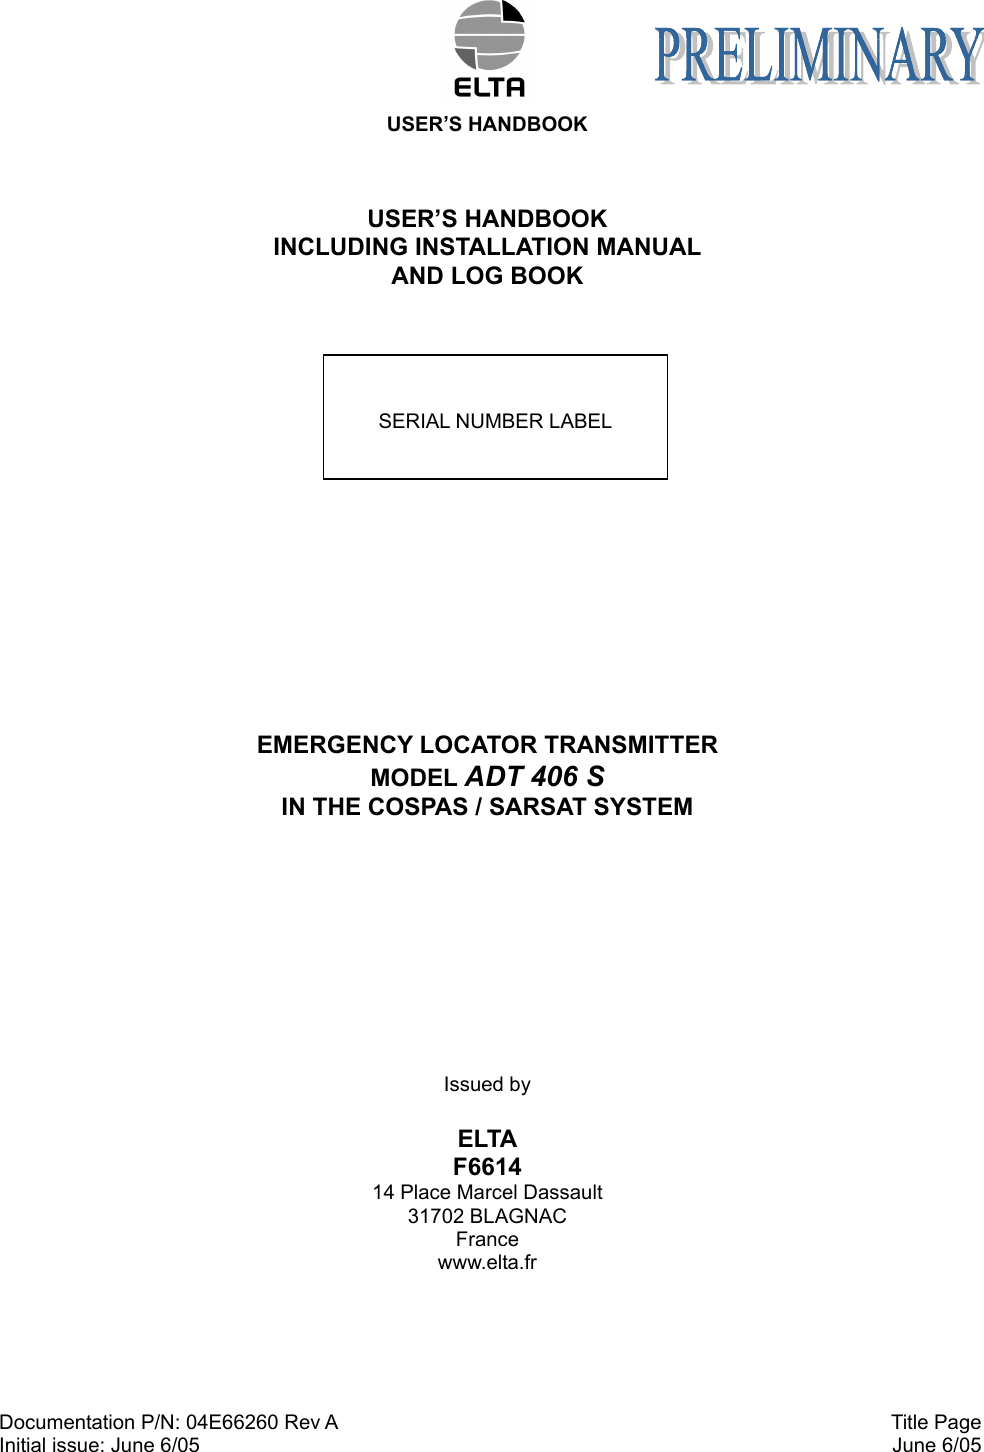  USER’S HANDBOOK Documentation P/N: 04E66260 Rev A Initial issue: June 6/05  Title Page  June 6/05  USER’S HANDBOOK INCLUDING INSTALLATION MANUAL AND LOG BOOK    EMERGENCY LOCATOR TRANSMITTER MODEL ADT 406 S IN THE COSPAS / SARSAT SYSTEM    Issued by  ELTA F6614 14 Place Marcel Dassault 31702 BLAGNAC France www.elta.fr  SERIAL NUMBER LABEL 